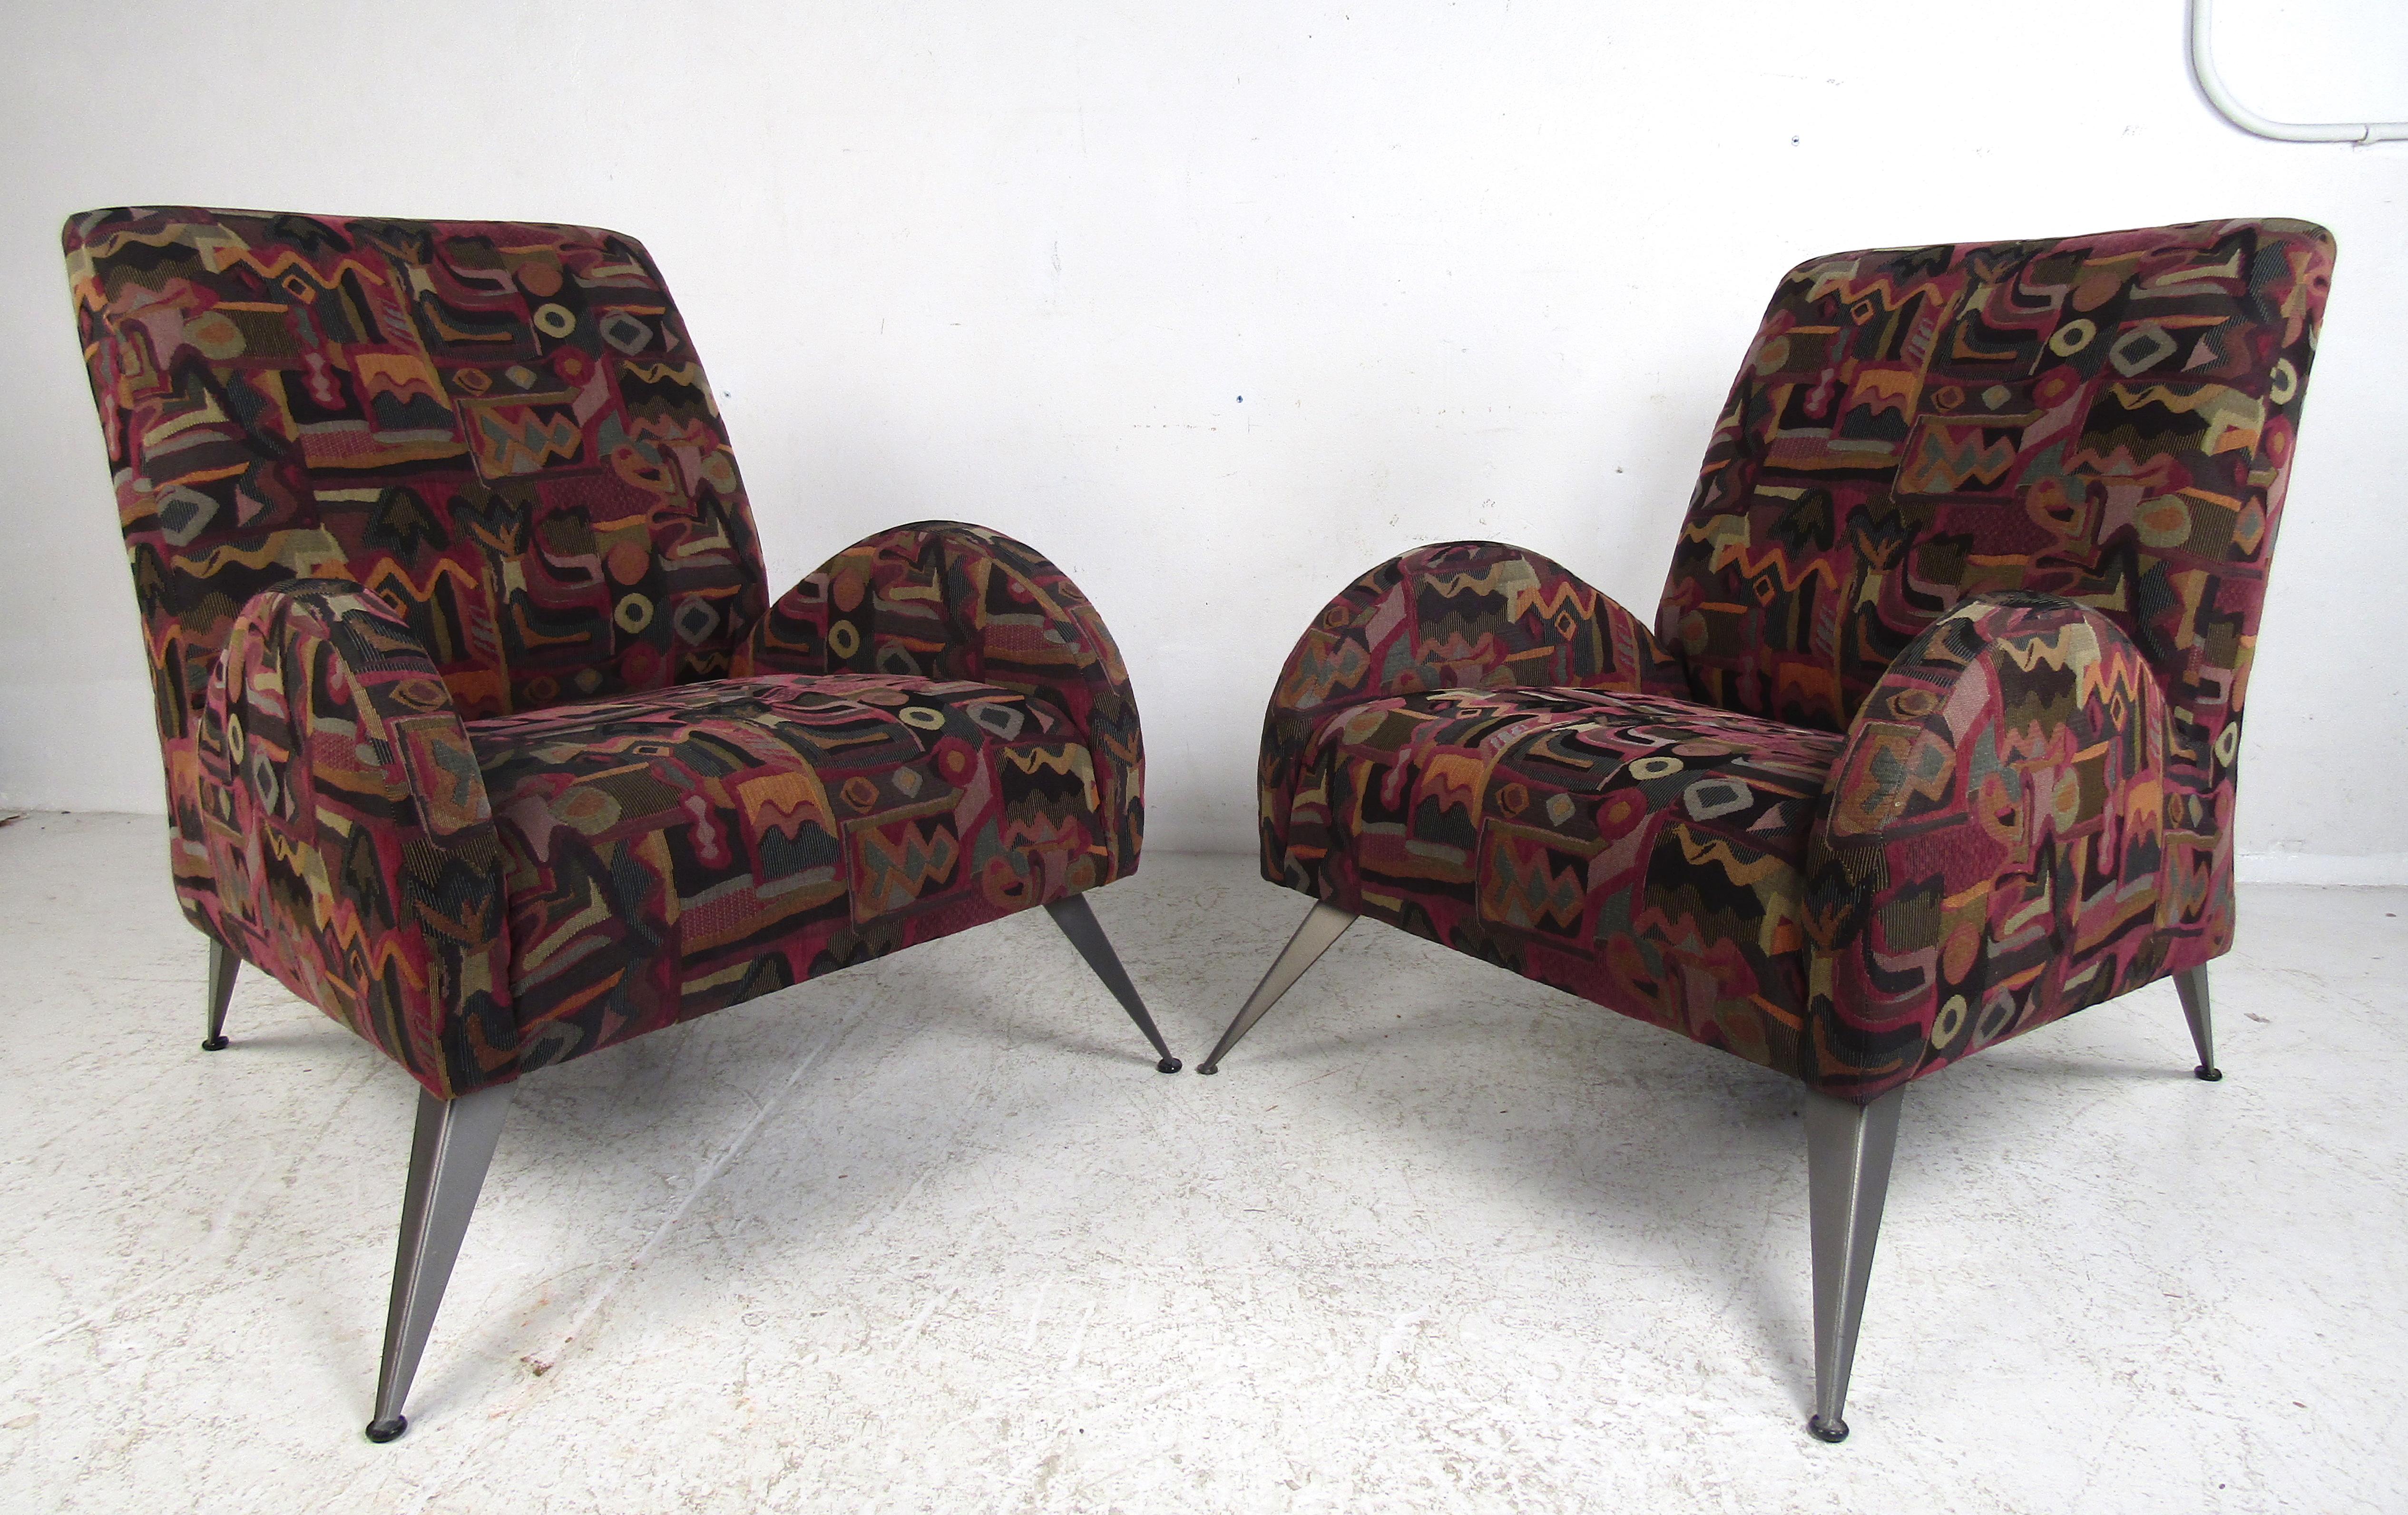 This beautiful pair of Italian modern lounge chairs boast unusual splayed metal legs and unique ellipse-shaped armrests. A wild Art Deco/midcentury style design that ensures maximum comfort in any setting. The extremely soft fabric has wonderful